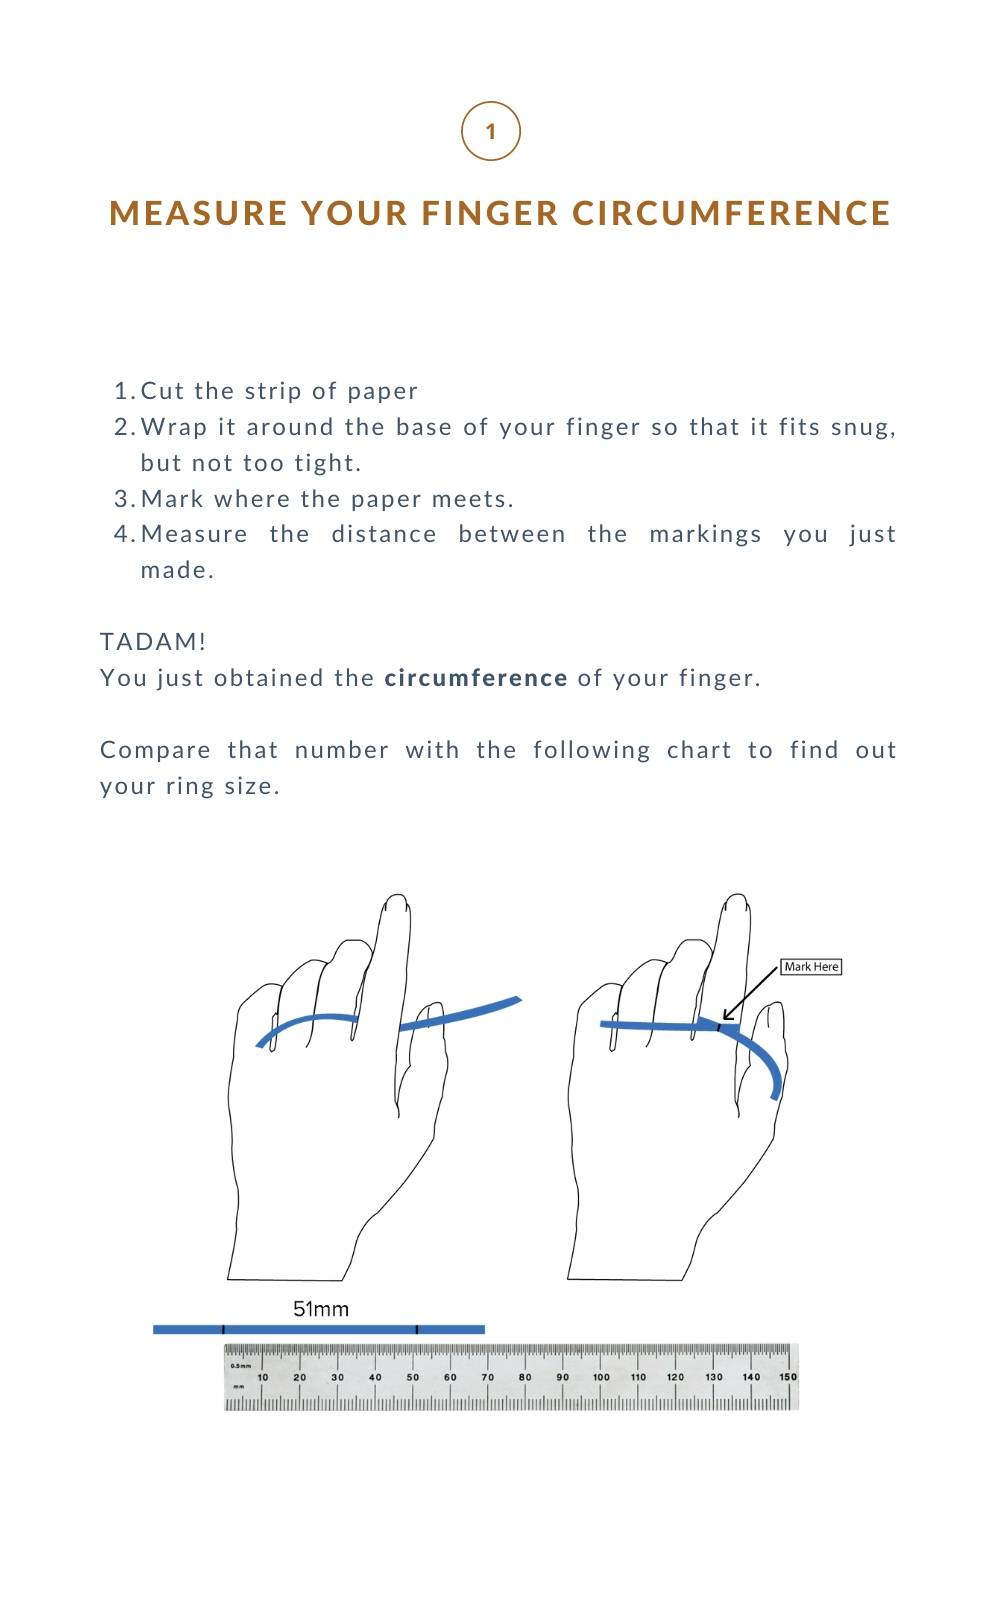 Measure your finger circumference